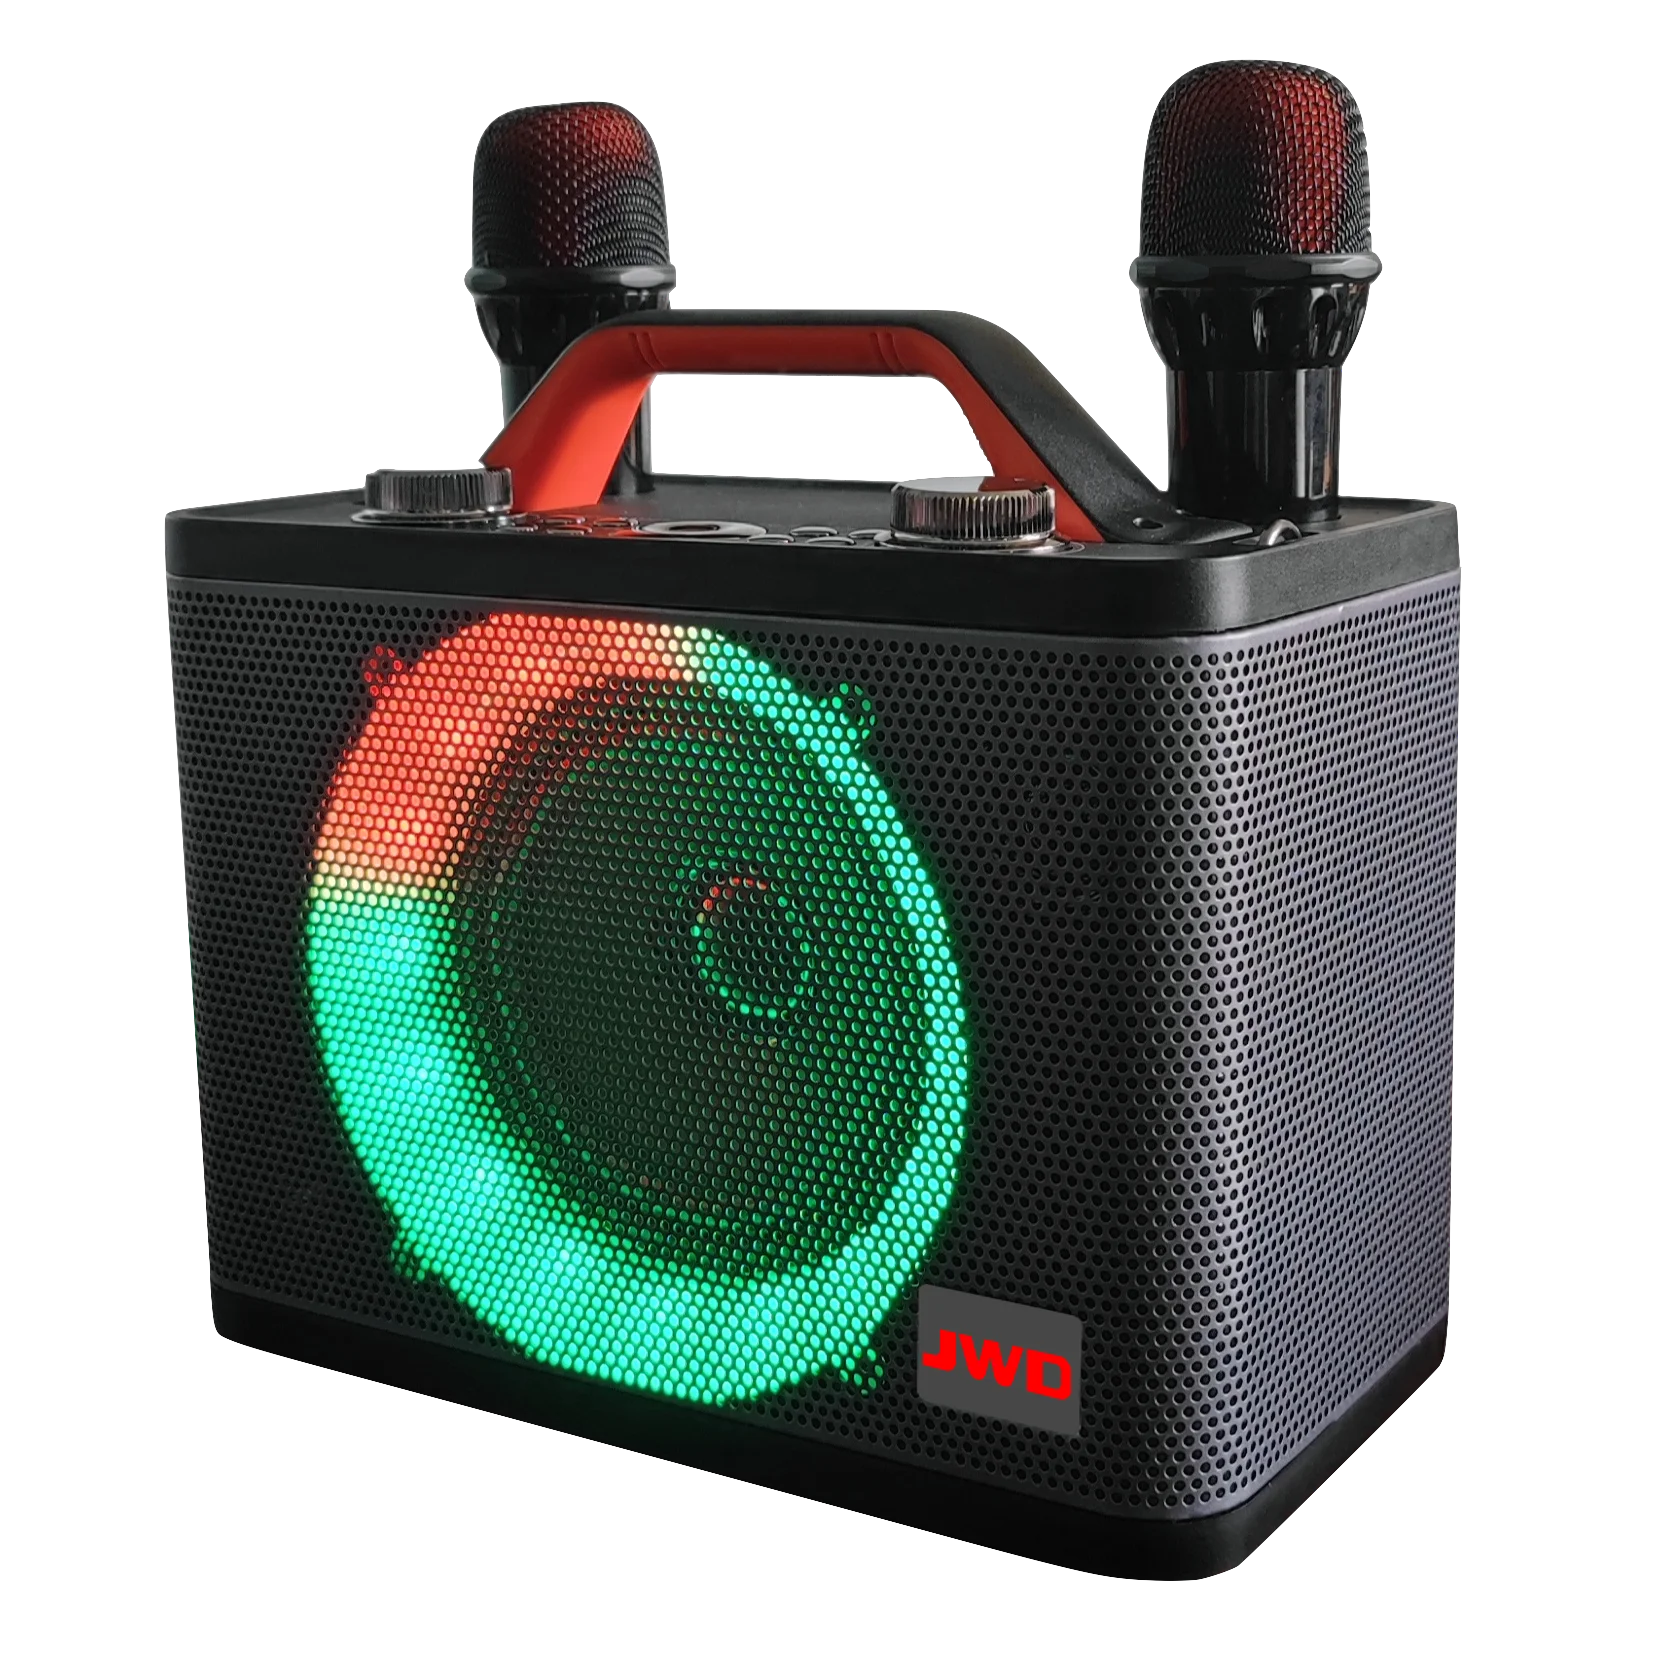 Portable bluetooth speaker with double microphones ,wireless speaker with colorful flashing lights  for Outdoor, Home, Party